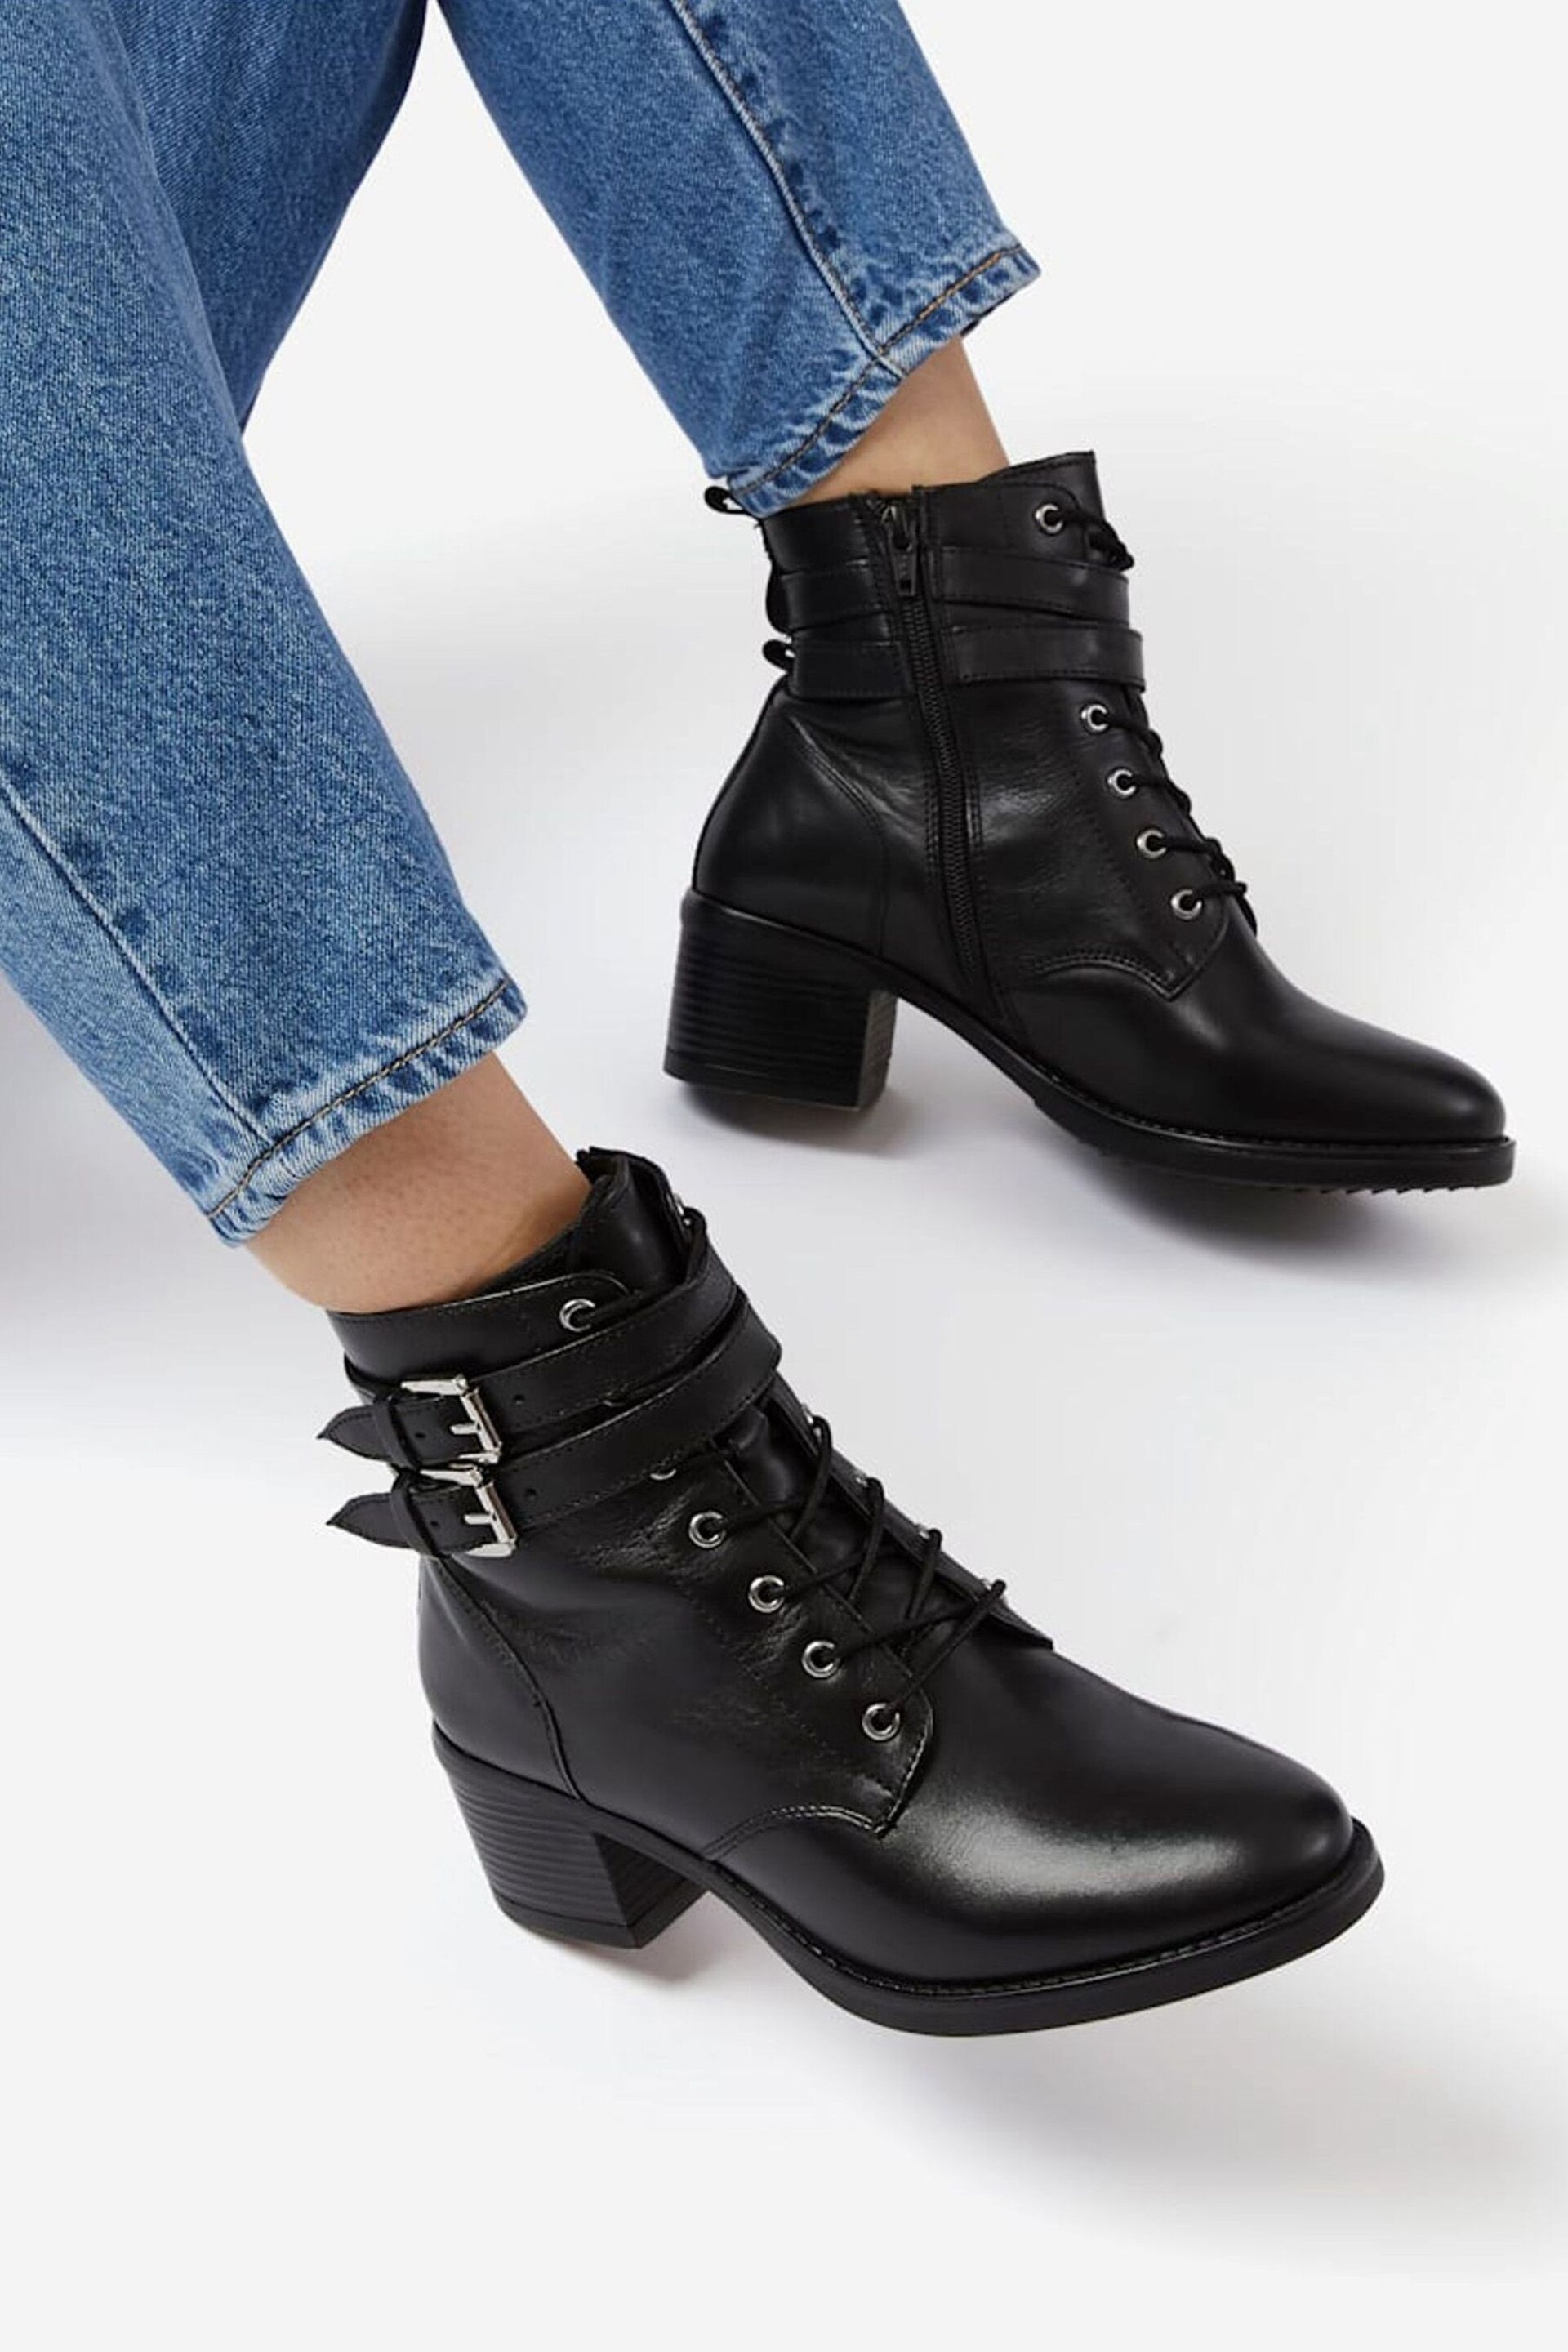 Dune London Black Wide Fit Paxan Buckle Detail Heeled Ankle Boots - Image 2 of 8